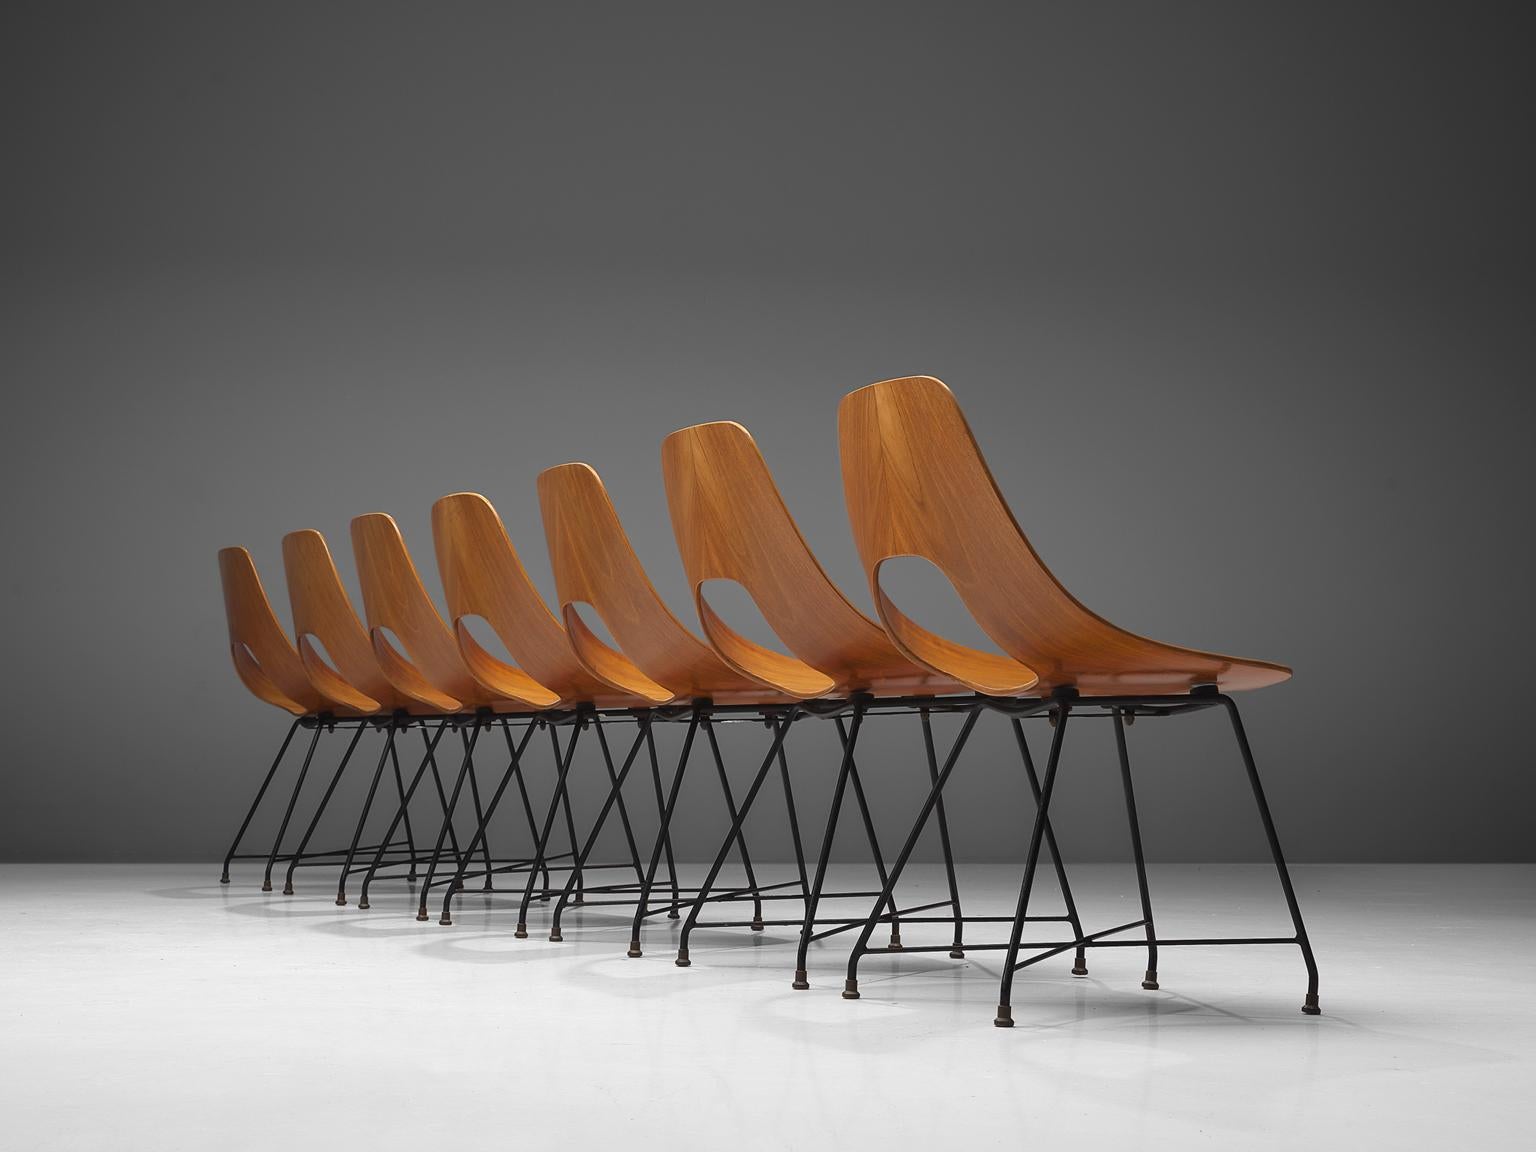 Augusto Bozzi for Saporiti, set of 7 'Ariston' dining chairs, teak, steel and brass, Italy, 1957.

Elegant set of seven 'Ariston' chairs designed by Augusto Bozzi for Saporiti. This set is made out of a solid bend plywood piece of teak have a very